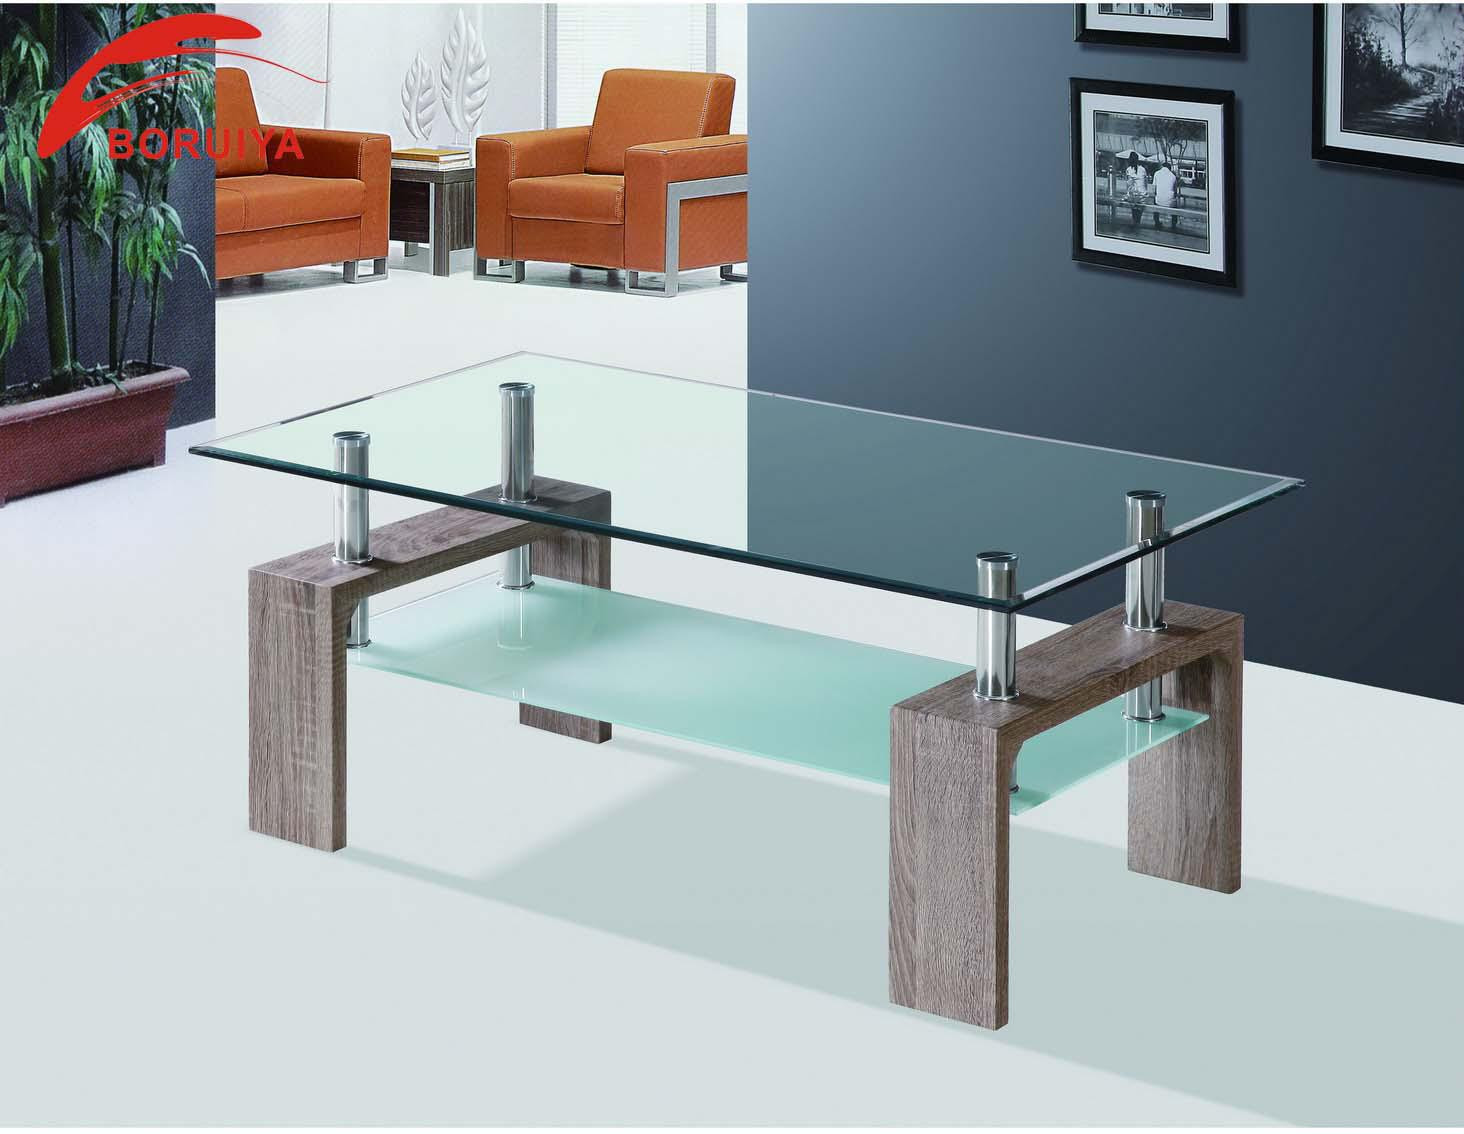 Living Room Glass Table
 Living Room Furniture Center Table Design coffee Table